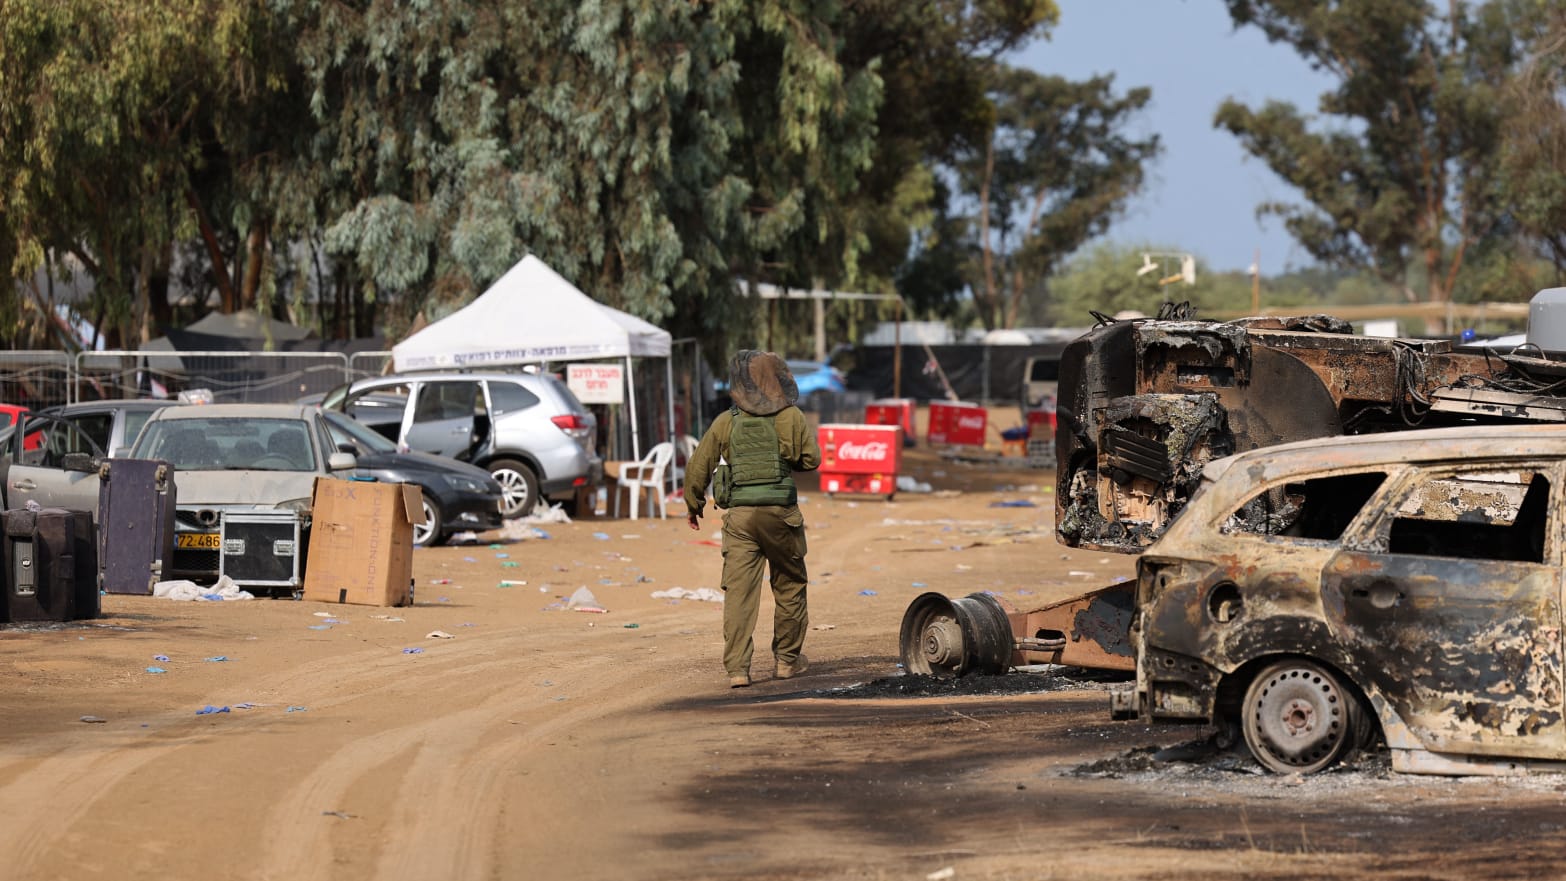 An Israeli soldier walks past burned vehicles at the site of the weekend attack on the Supernova desert music festival by Palestinian militants near Kibbutz Reim.